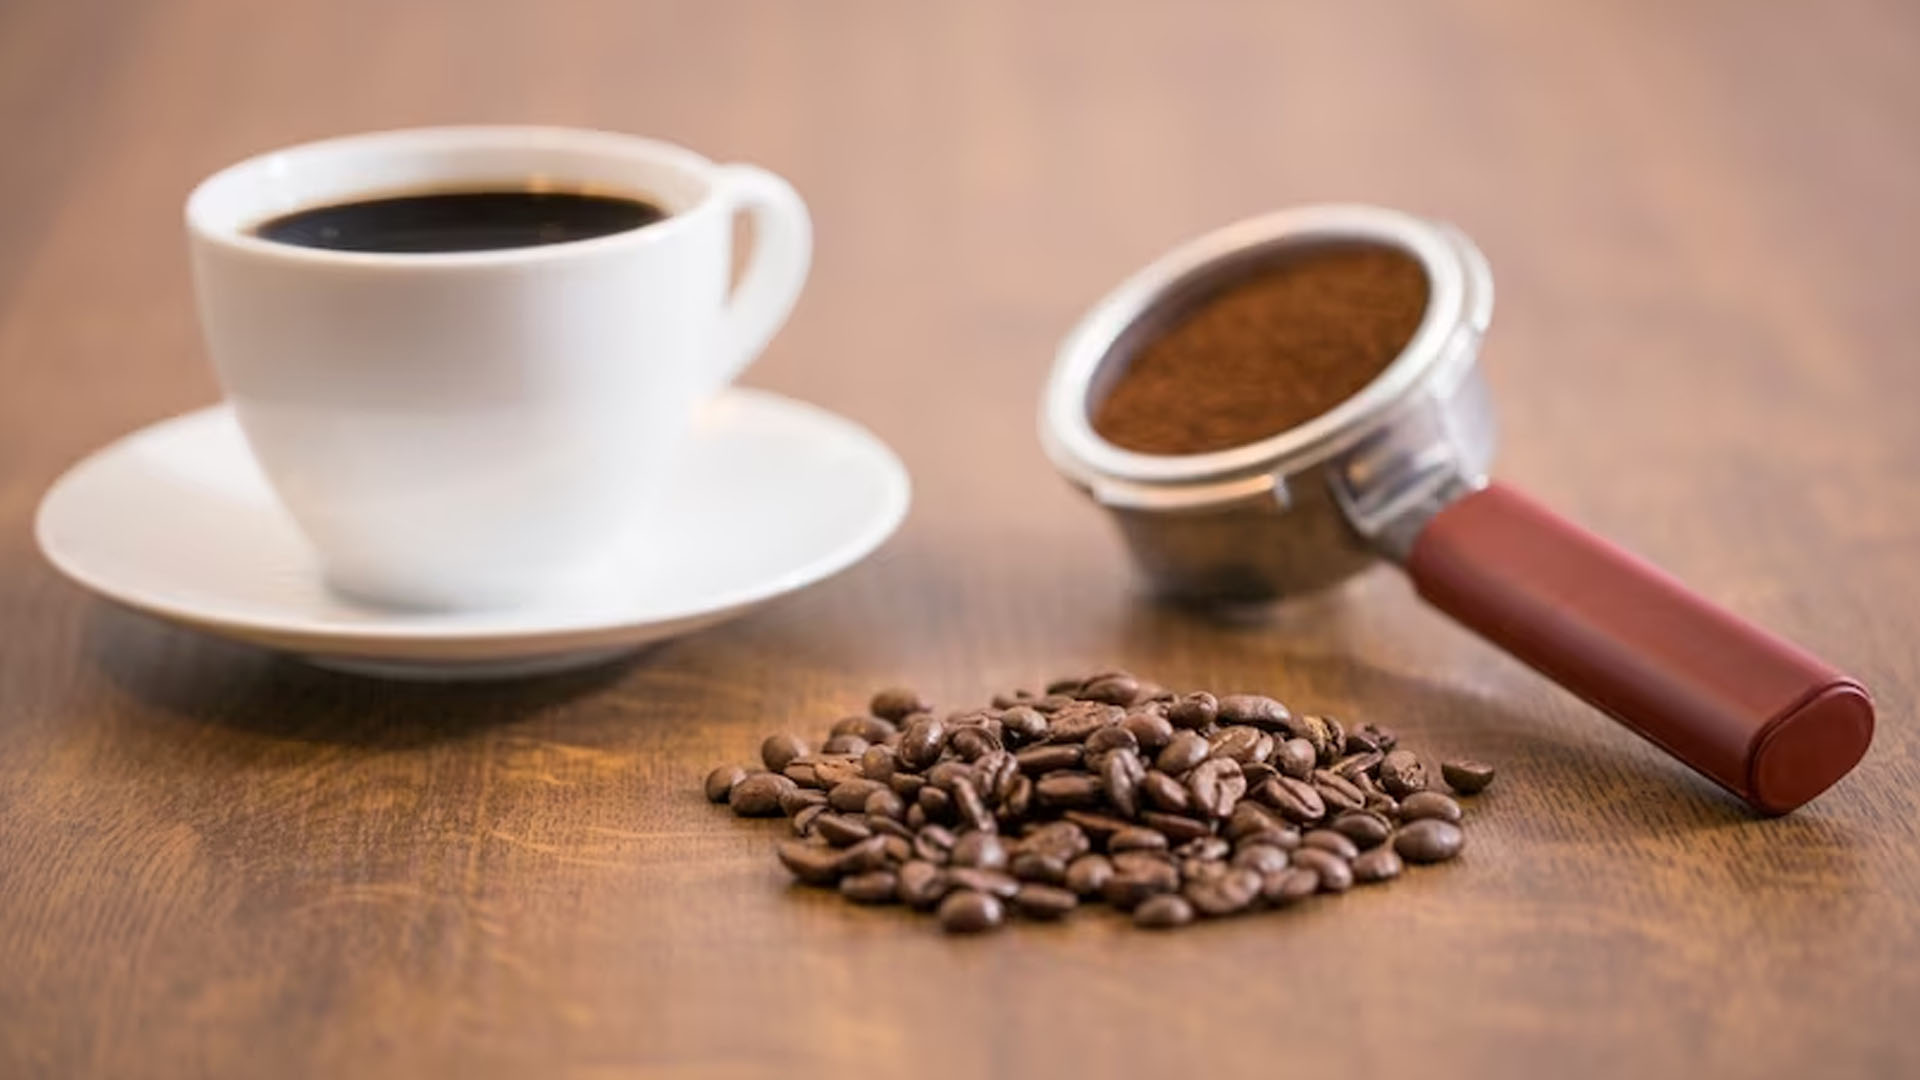 Does Decaffeinated Coffee Have Same Health Benefits?